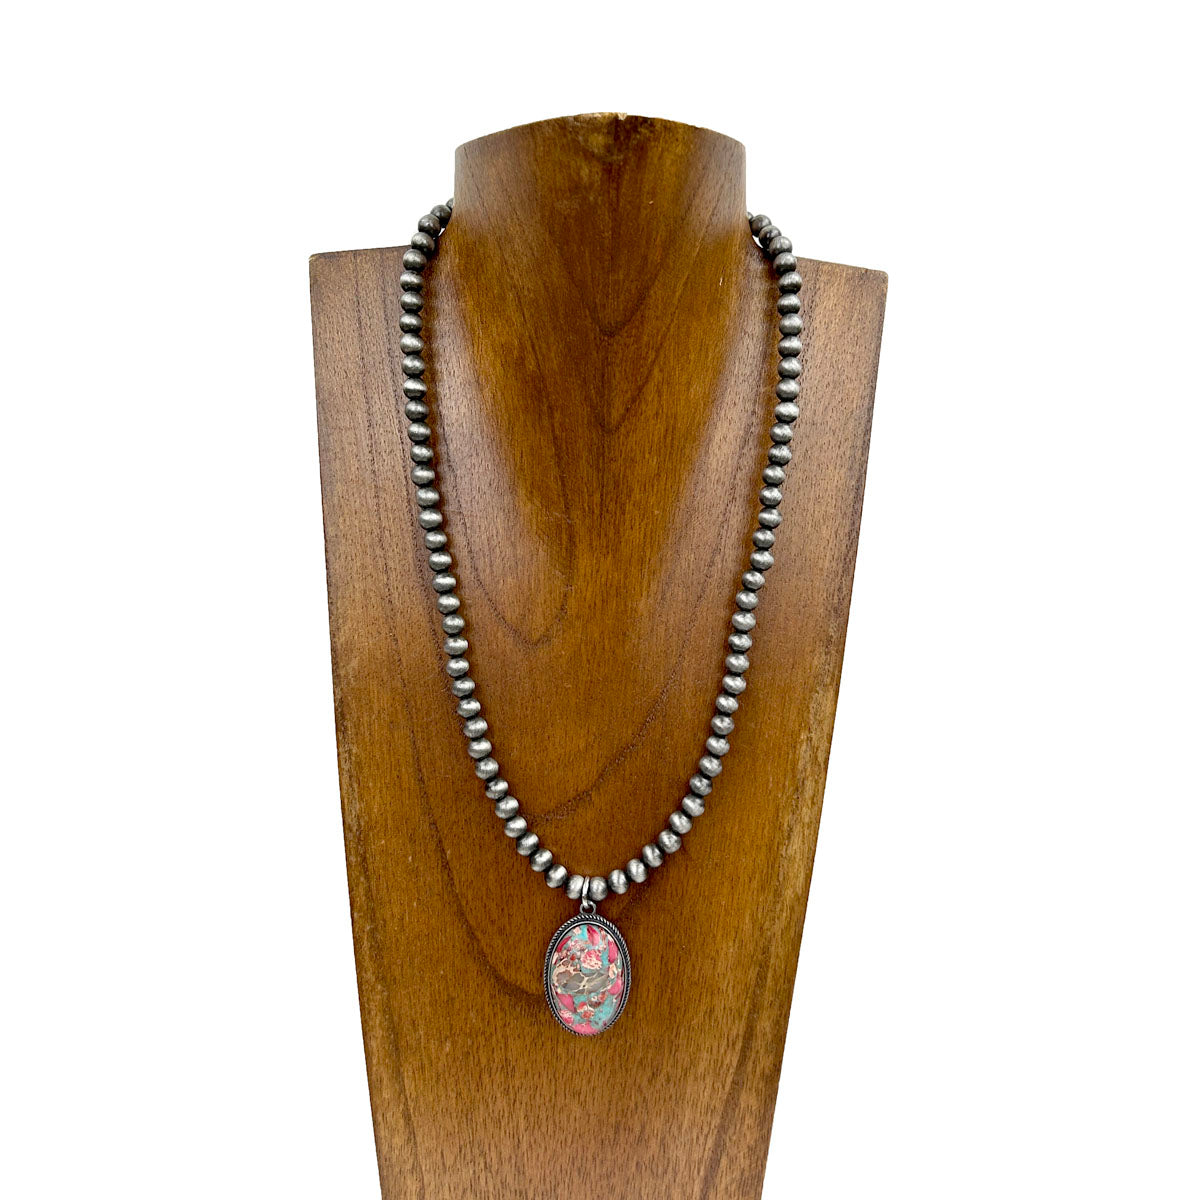 NKY230530-02-A	                           "17 Inches 6mm silver Navajo pearl beads with oval oyster  copper turquoise pendant Necklace"